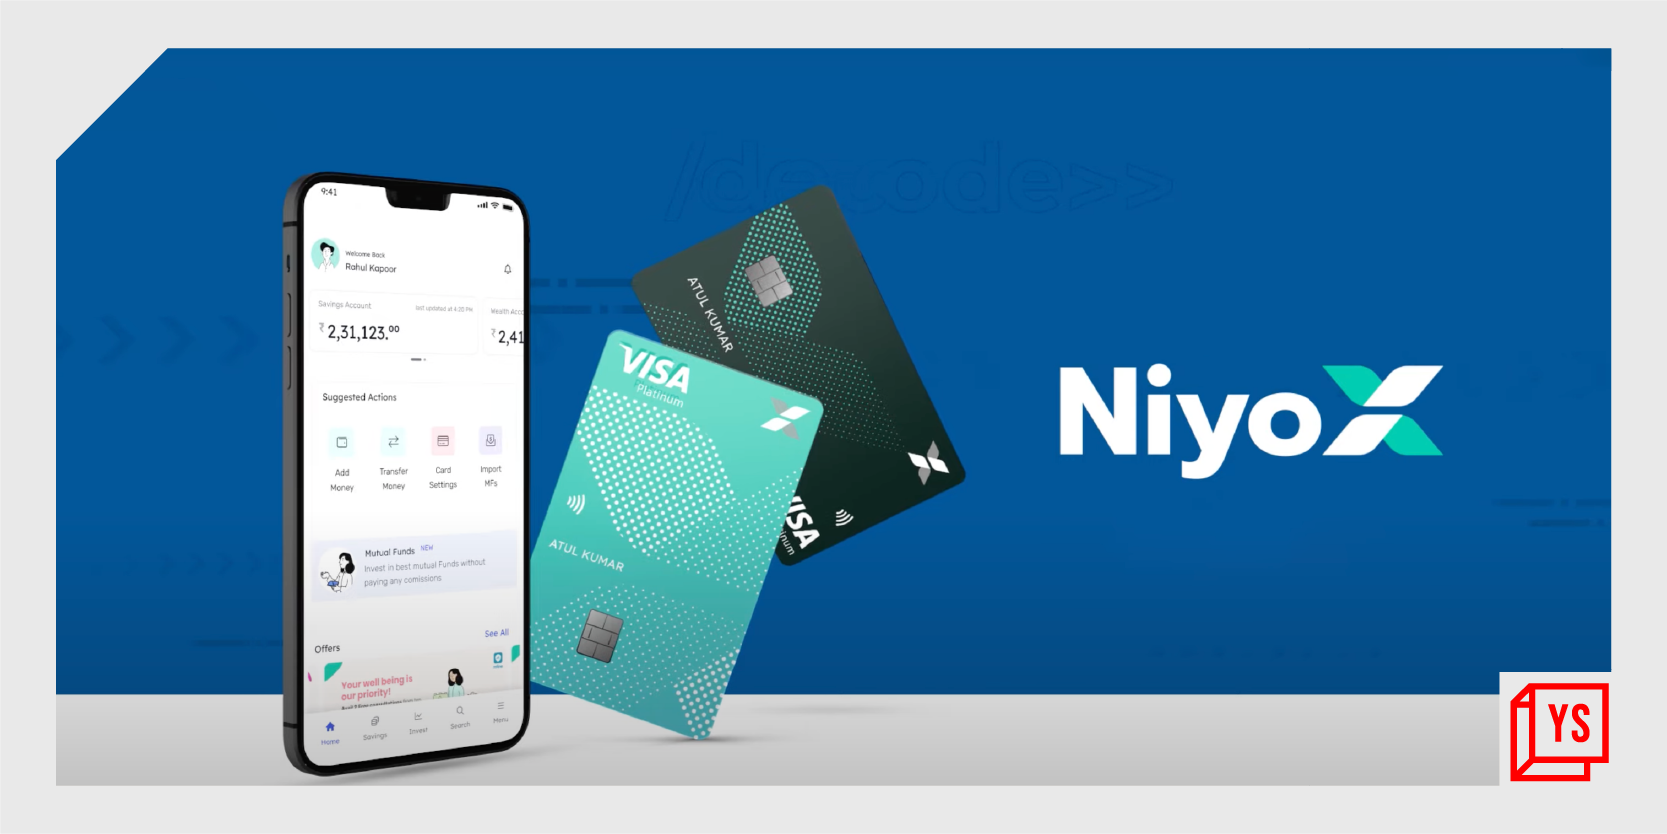 [App Friday] NiyoX has the right idea of ​​what millennials expect from banks today, but its execution is glitchy and needs fixing